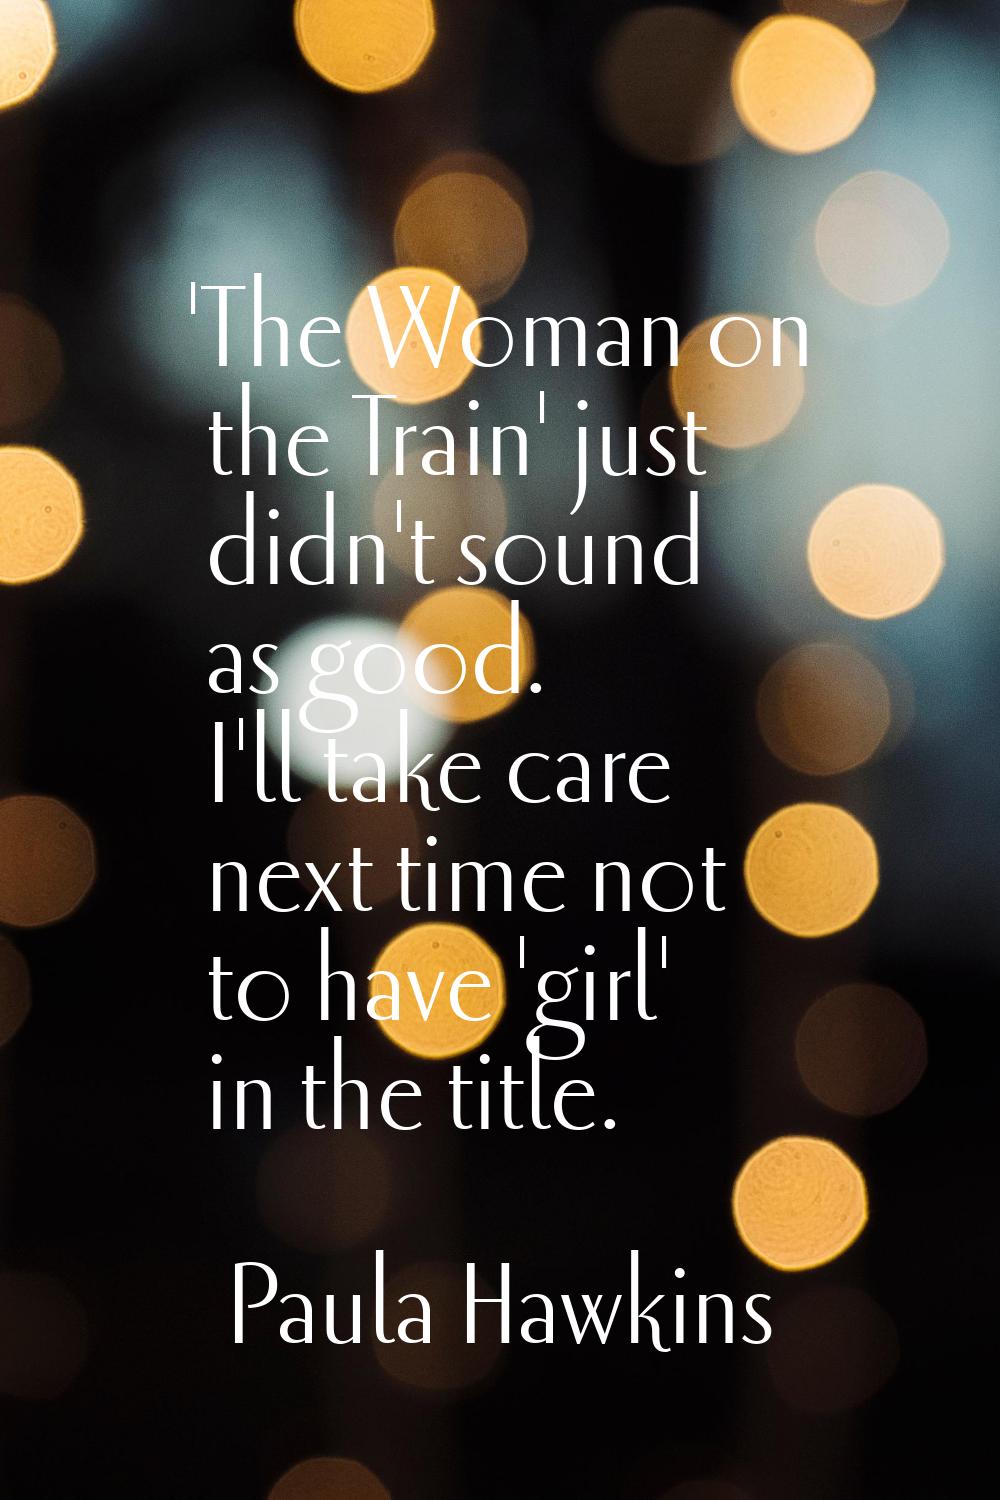 'The Woman on the Train' just didn't sound as good. I'll take care next time not to have 'girl' in 